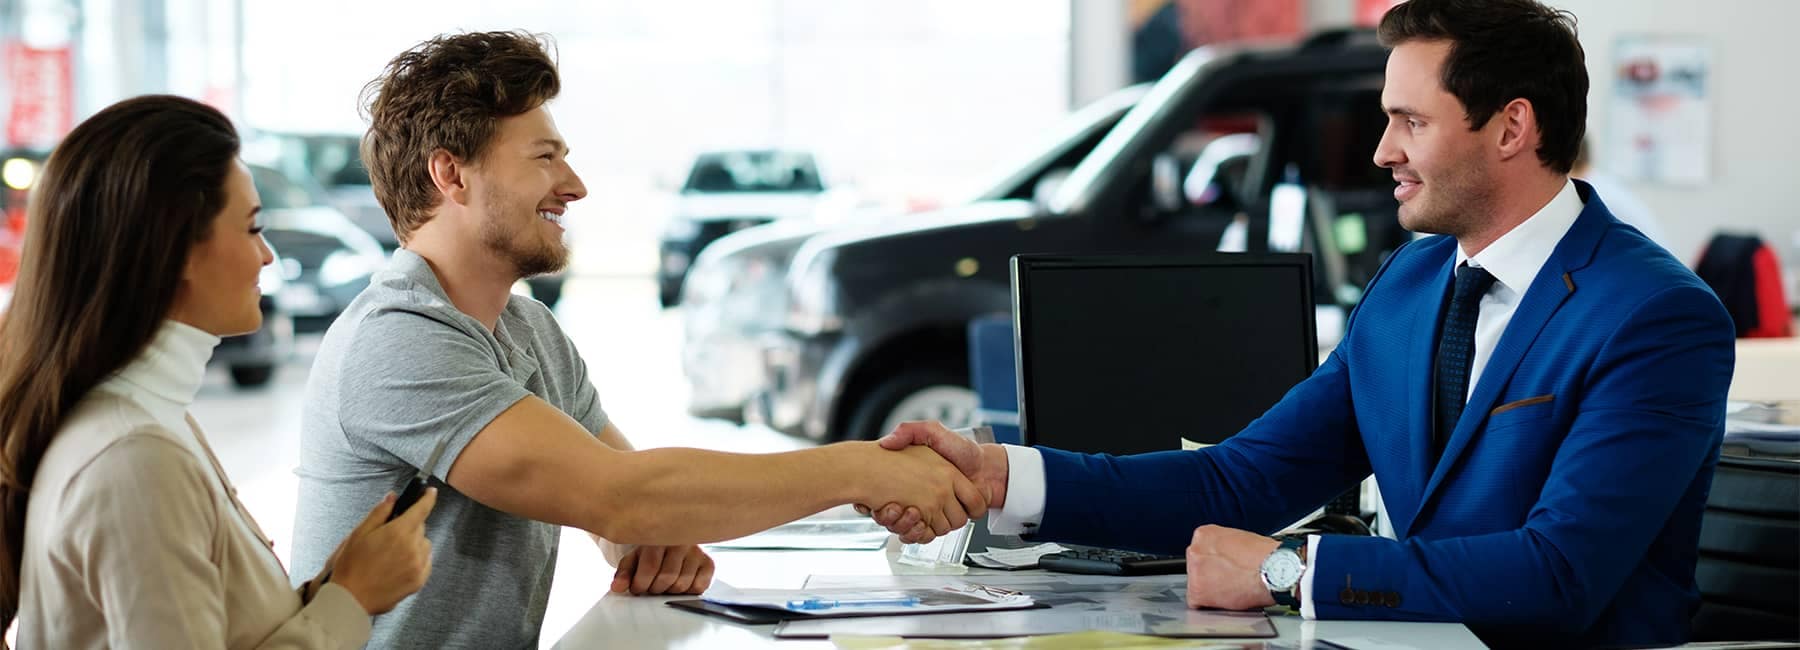 A customer and a car salesman shake hands after a car purchase